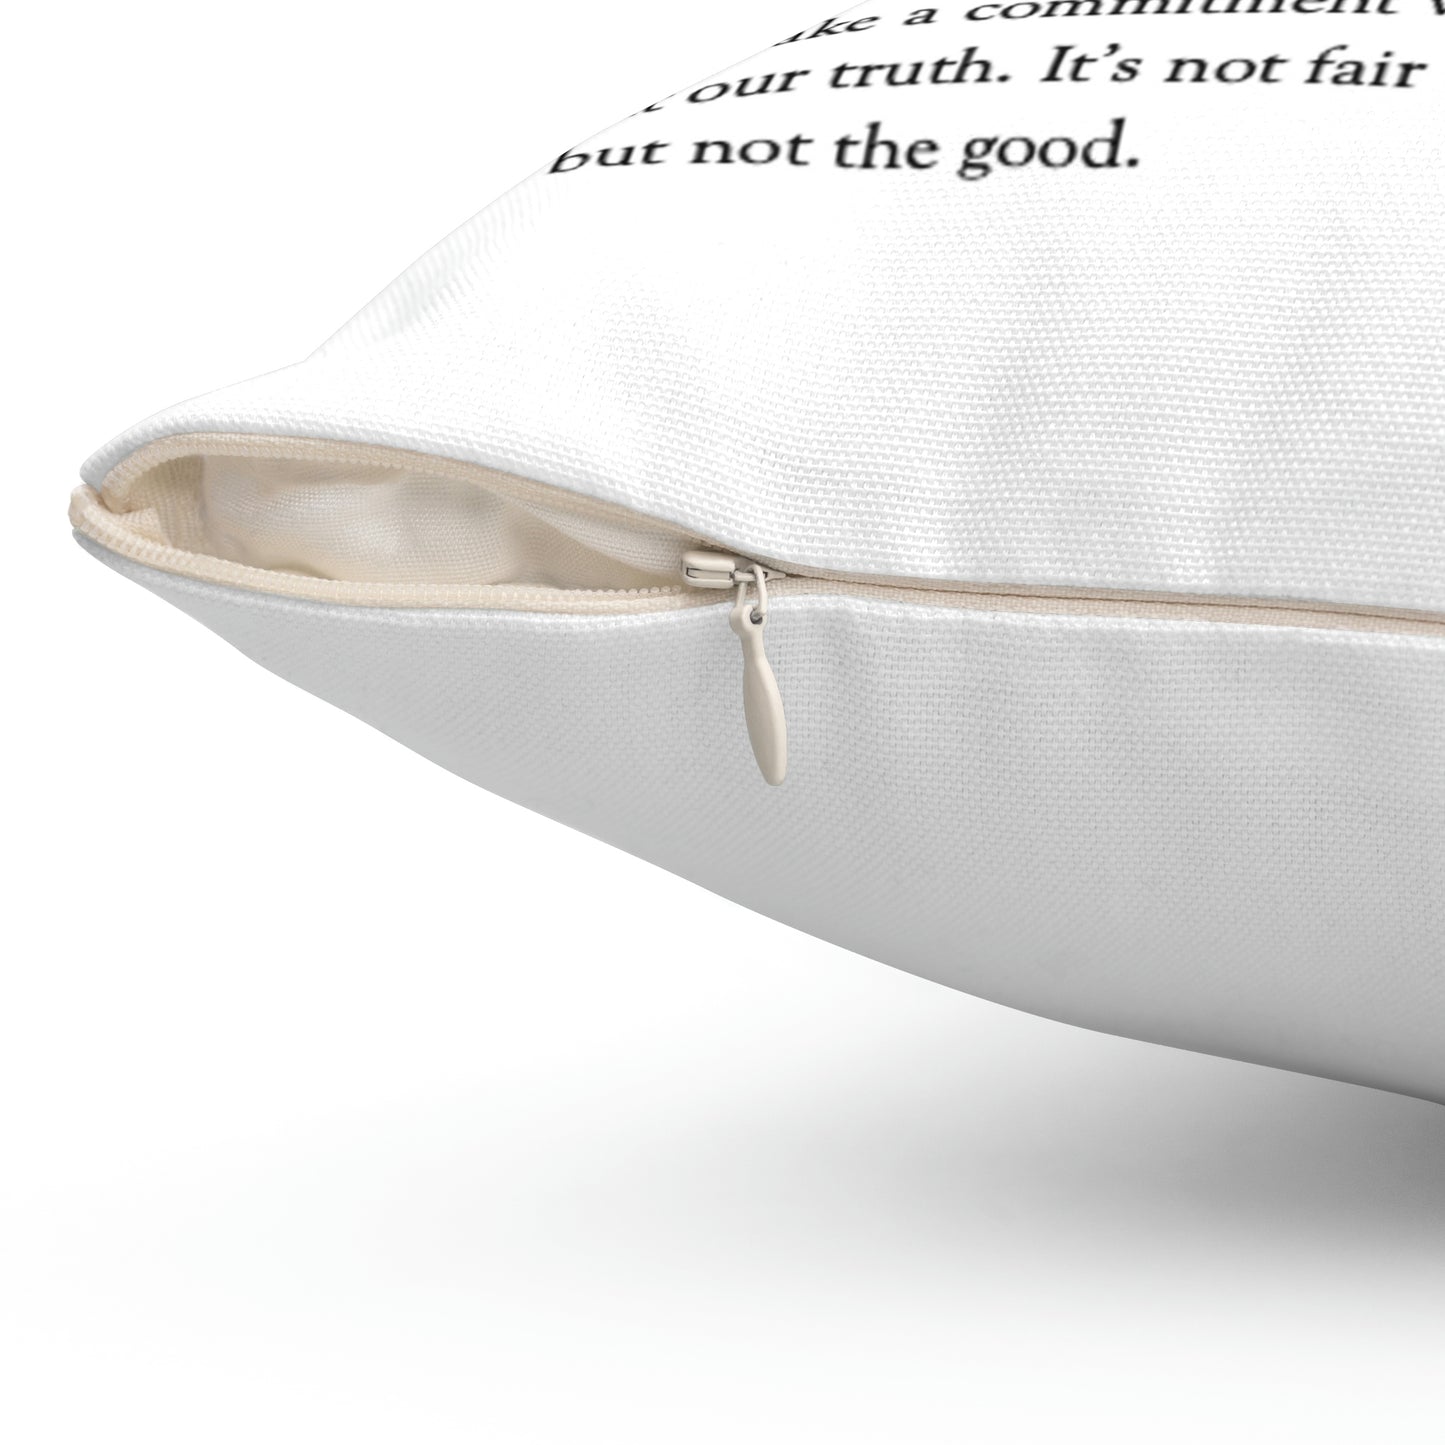 "You Deserve It" and "Gentle Reminder" Spun Polyester Square Pillow